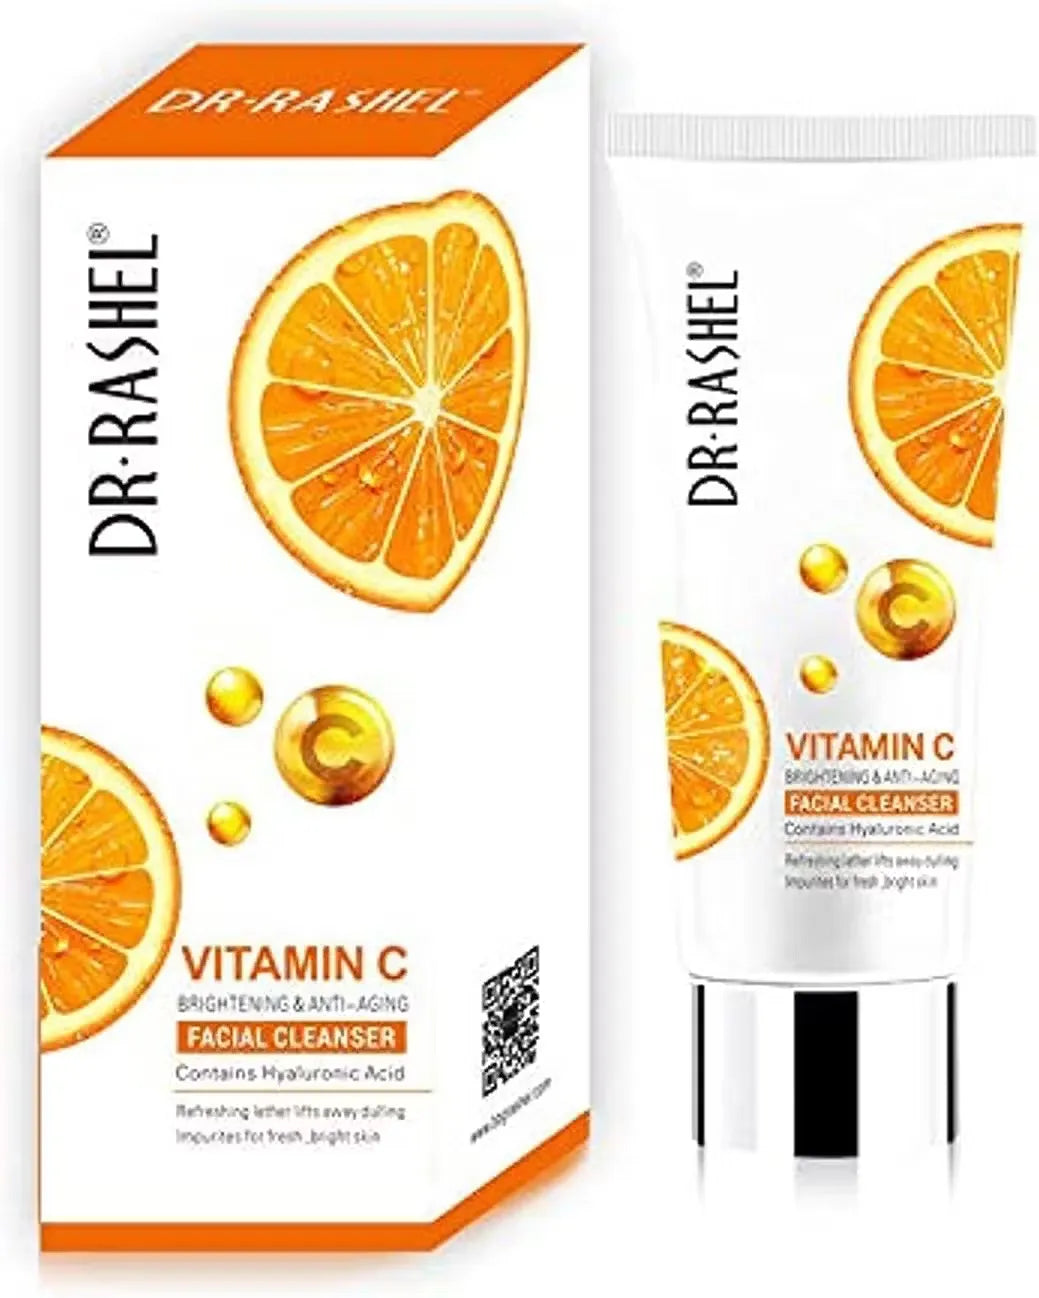 Dr. Rashel Vitamin C Facial Cleanser (80g) bottle with brightening and antioxidant benefits for a radiant complexion. Suitable for all skin types. Close-up photo of Dr. Rashel Vitamin C Facial Cleanser bottle with 80g label, featuring a pump dispenser and vibrant orange design.